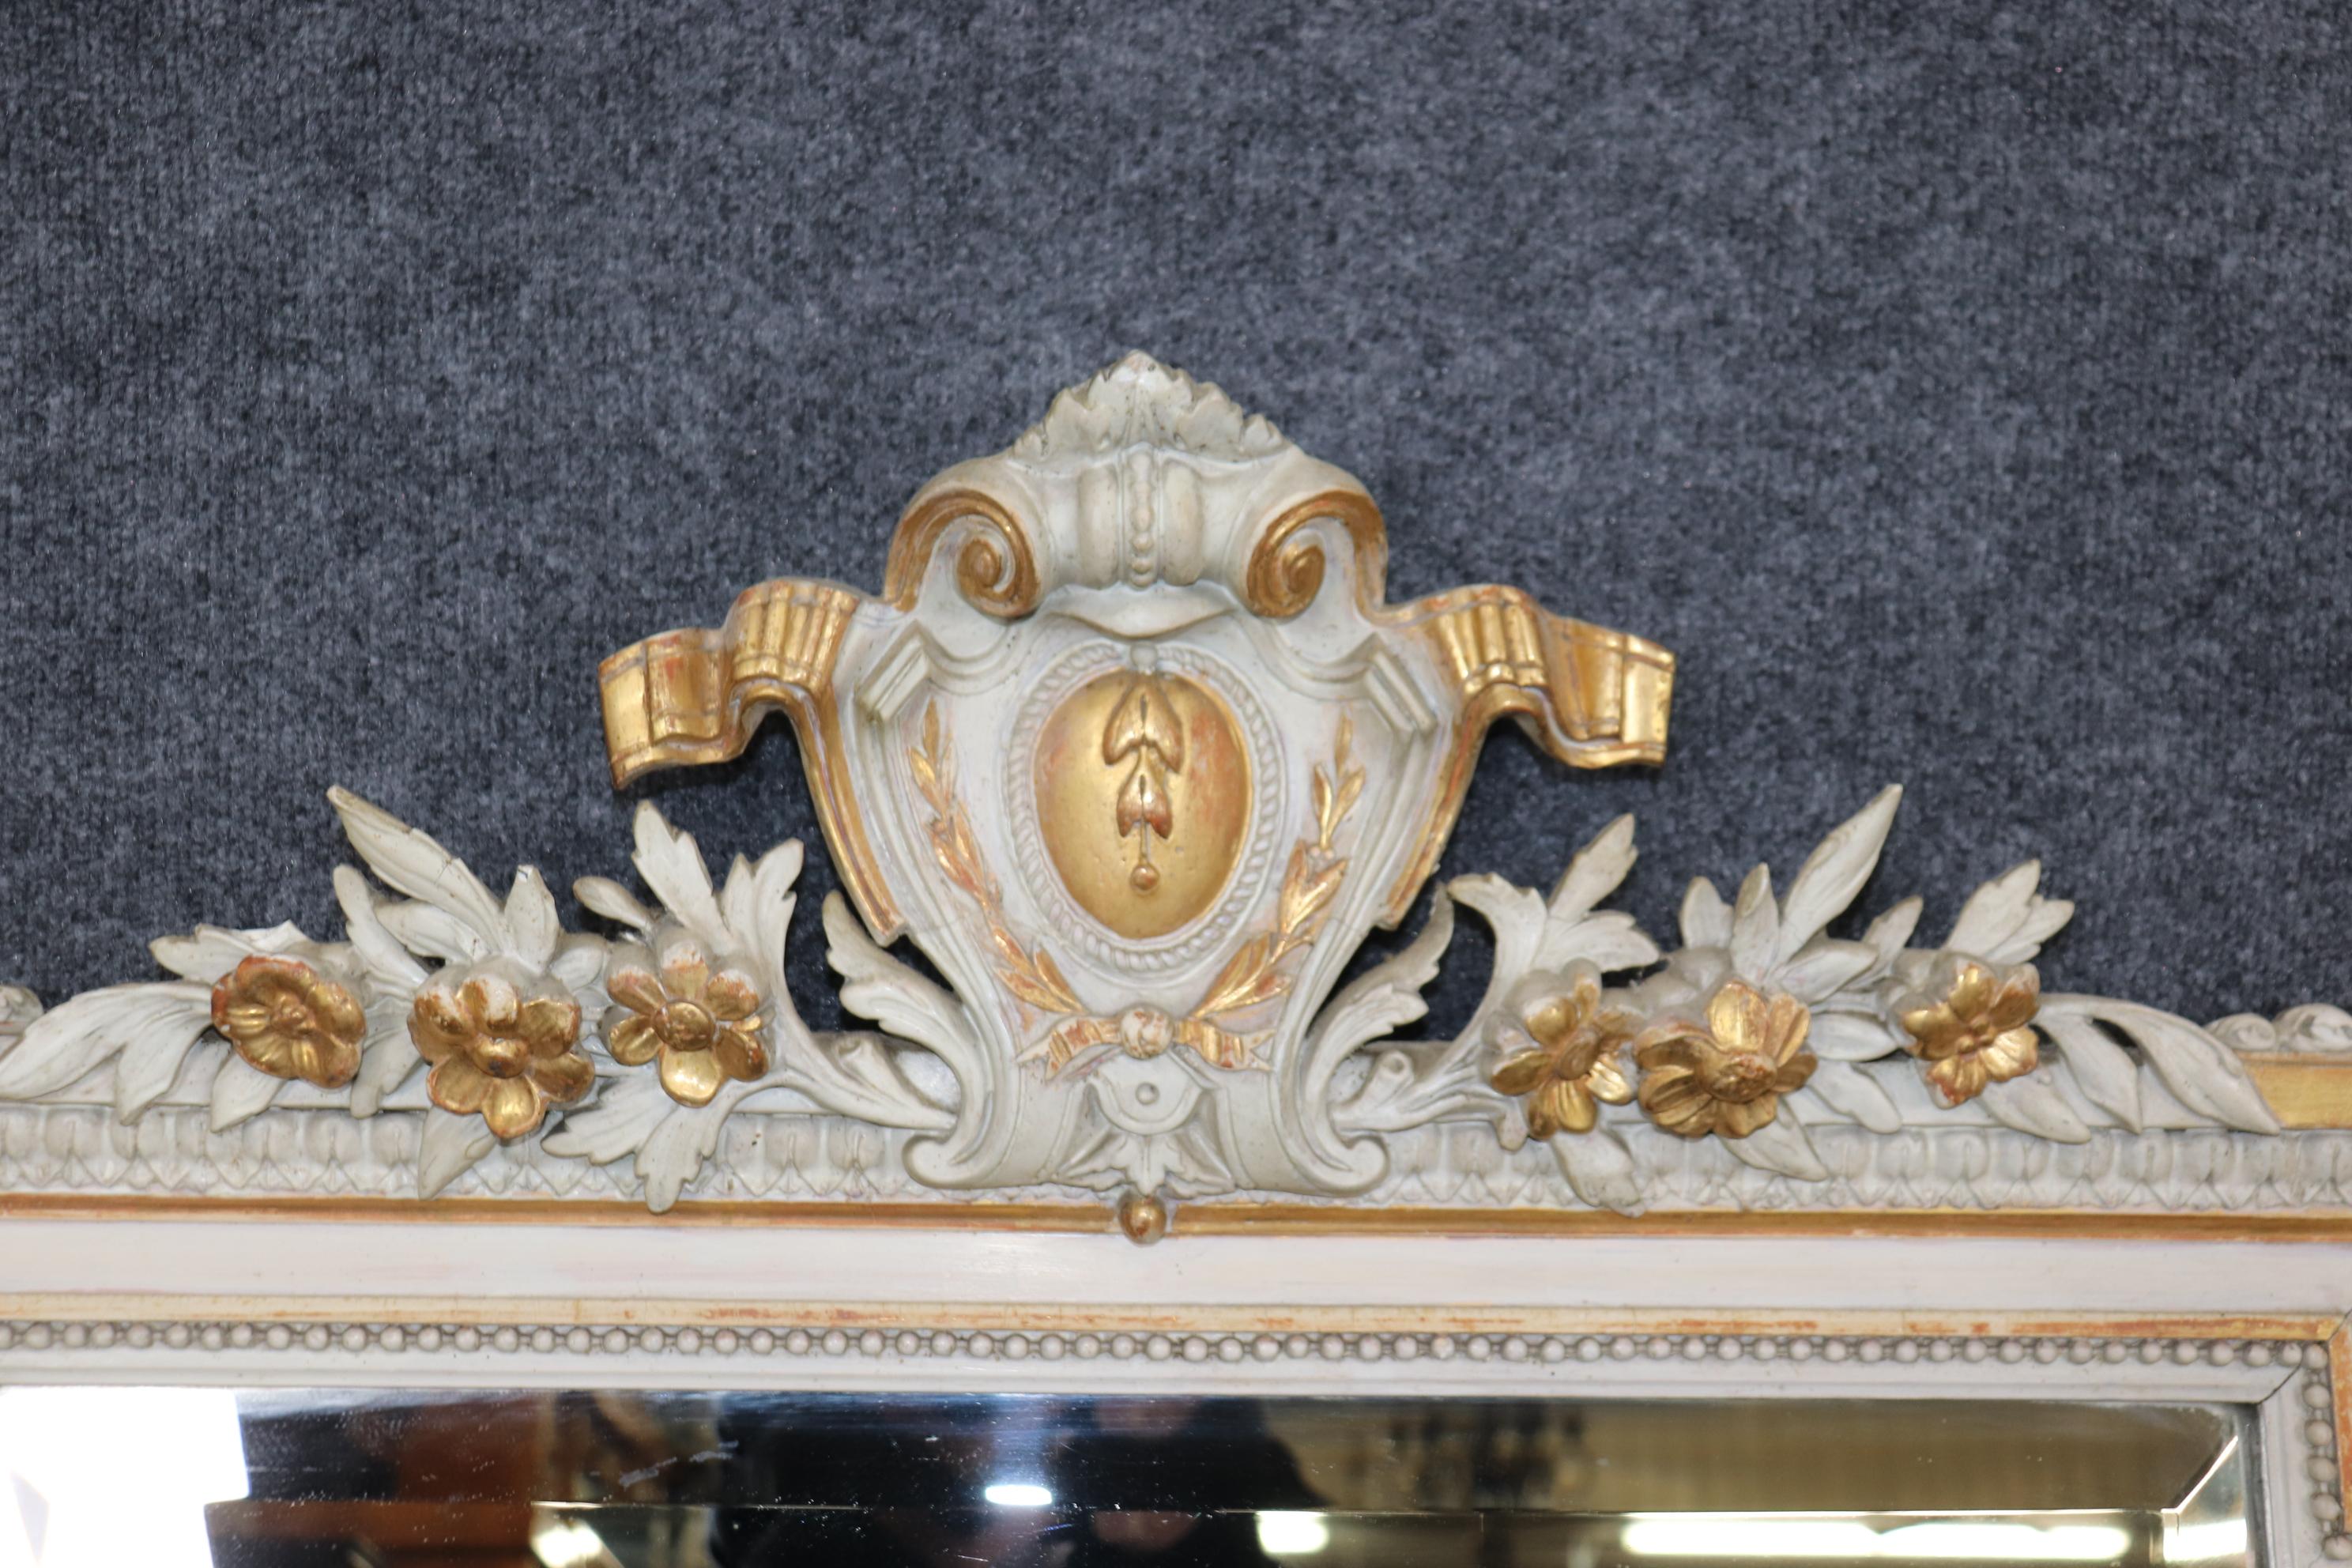 This is a beautiful gray painted and genuine gold gilded carved Louis XV mirror. The mirror can be used as a mantle (mantel) or buffet mirror. The mirror features gorgeous carved details and beautiful genuine gold leaf over an Italian red clay bole